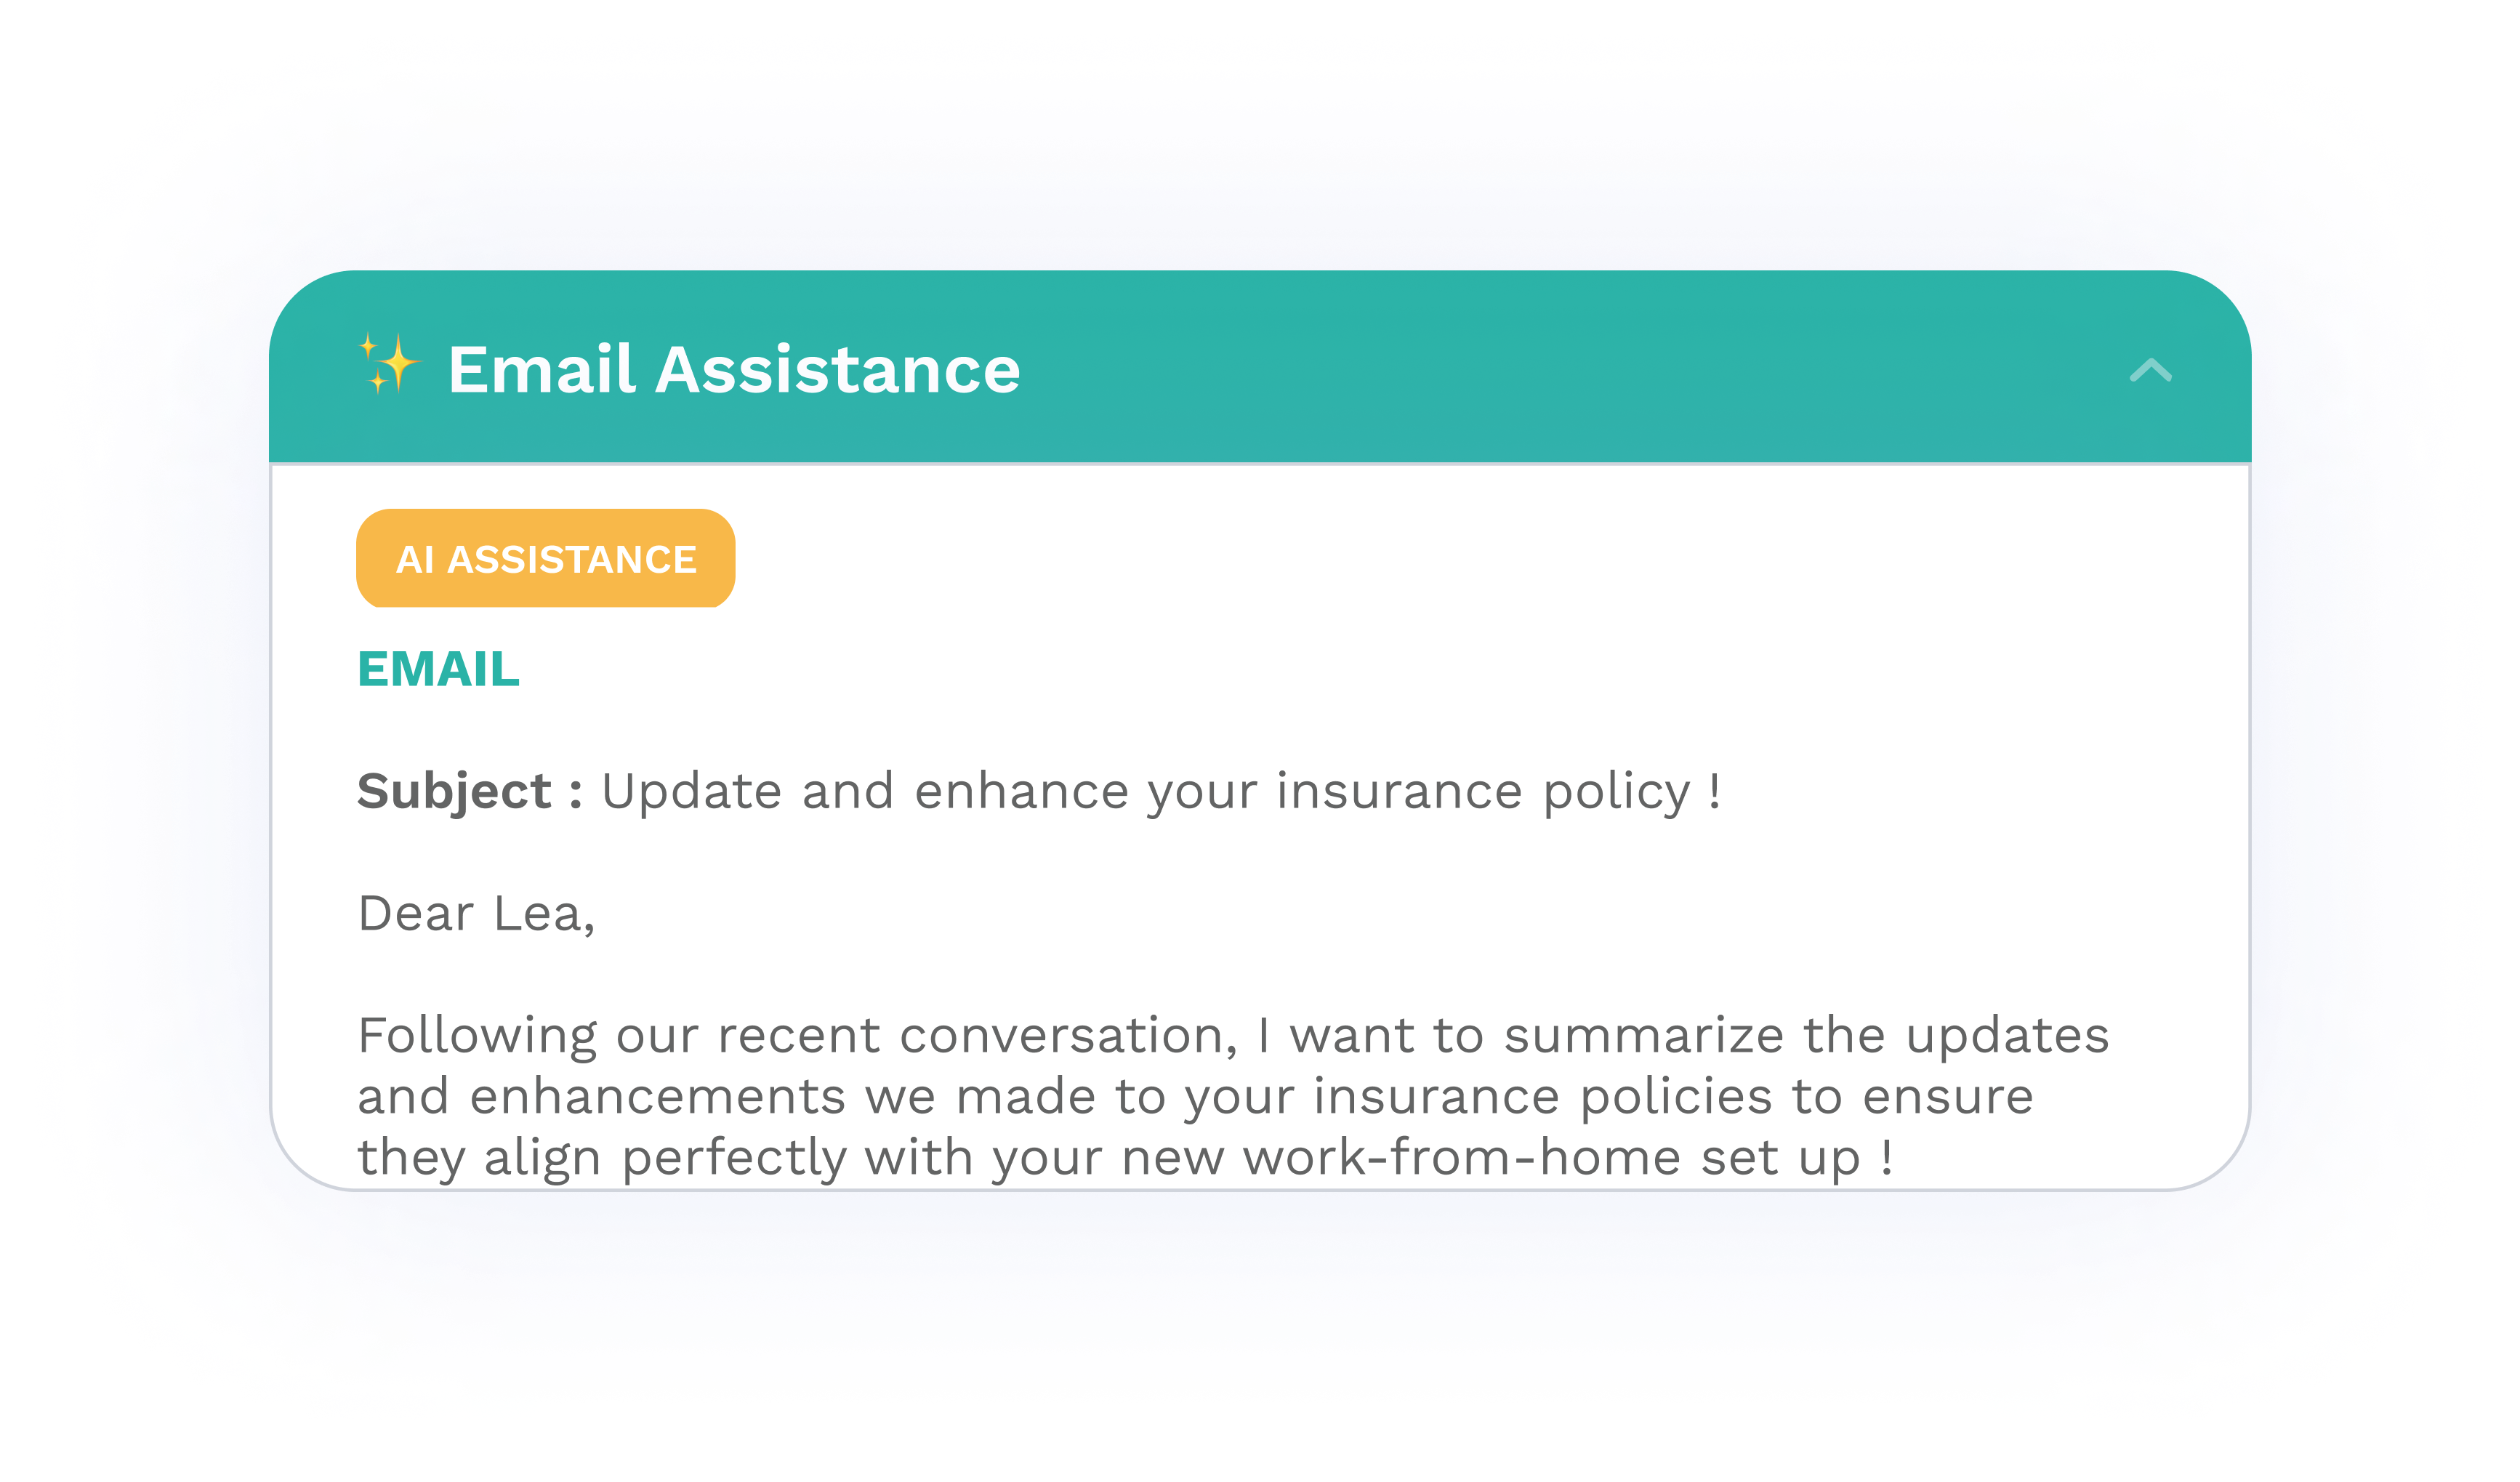 Email Assistance - powered by GenAI, insurance trained LLMs to summarize insurance calls automatically